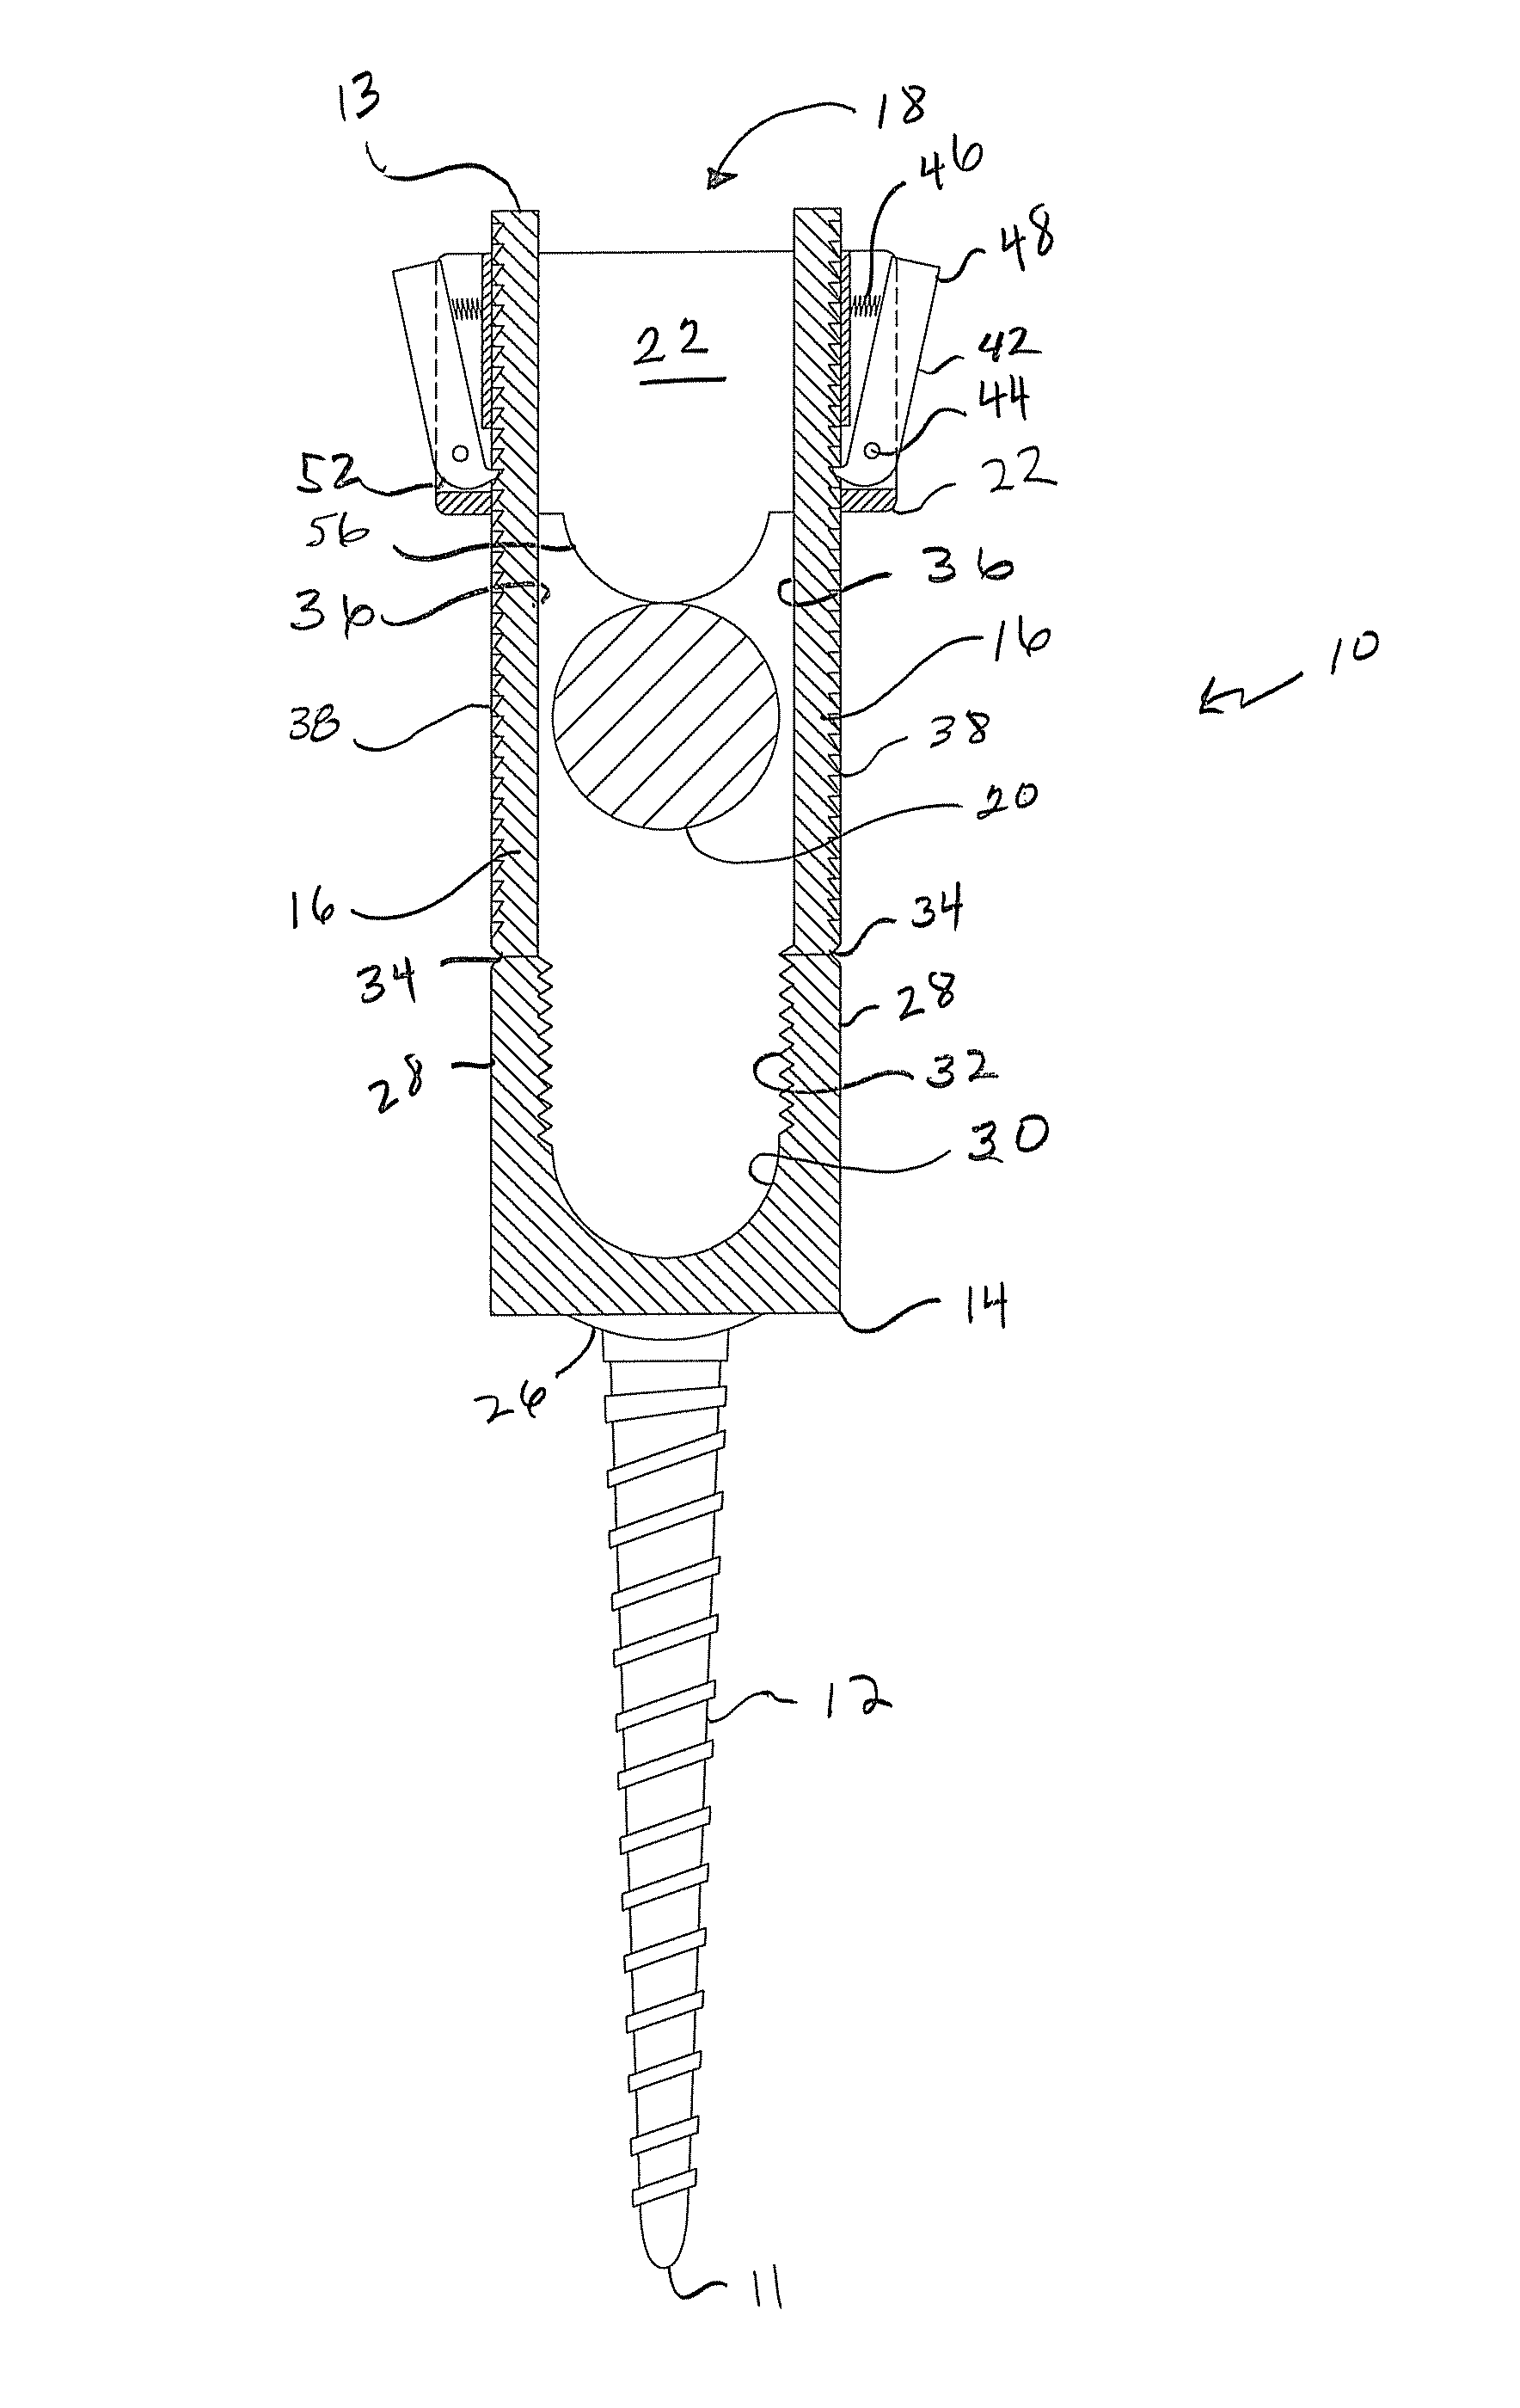 Screw and rod fixation system